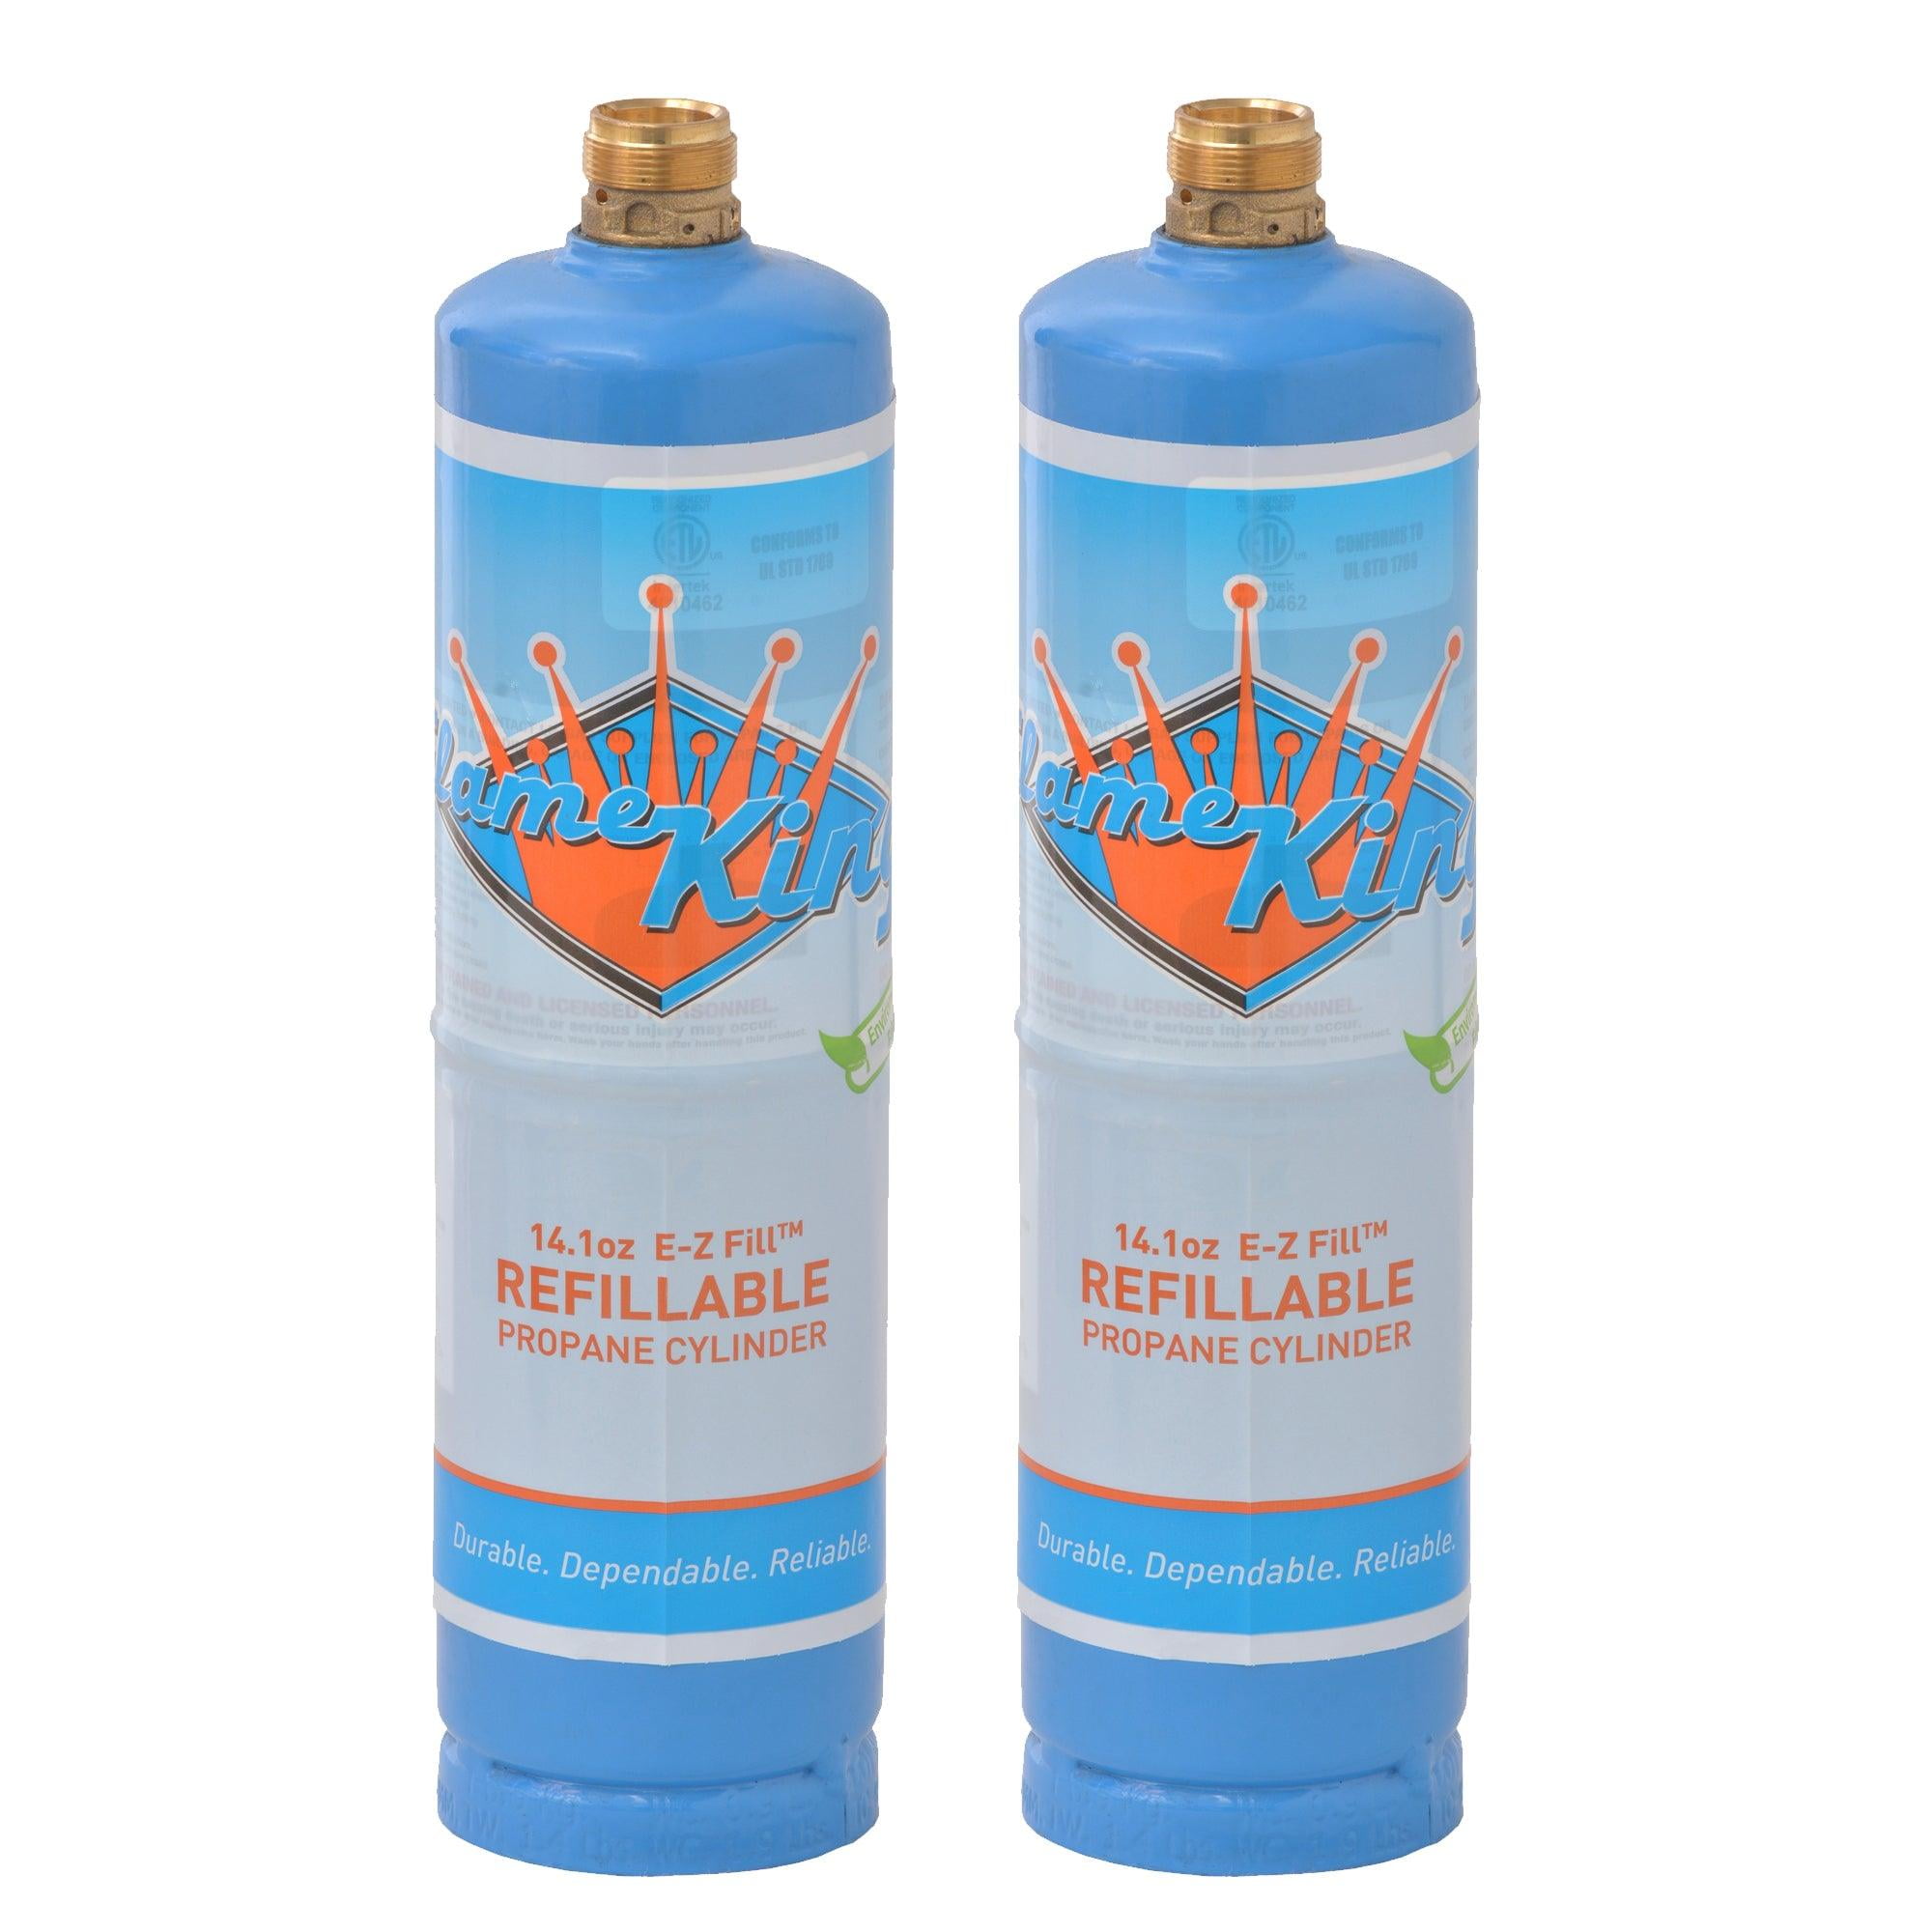 Flame King Three 1 lb. Refillable Propane Cylinders with Refill